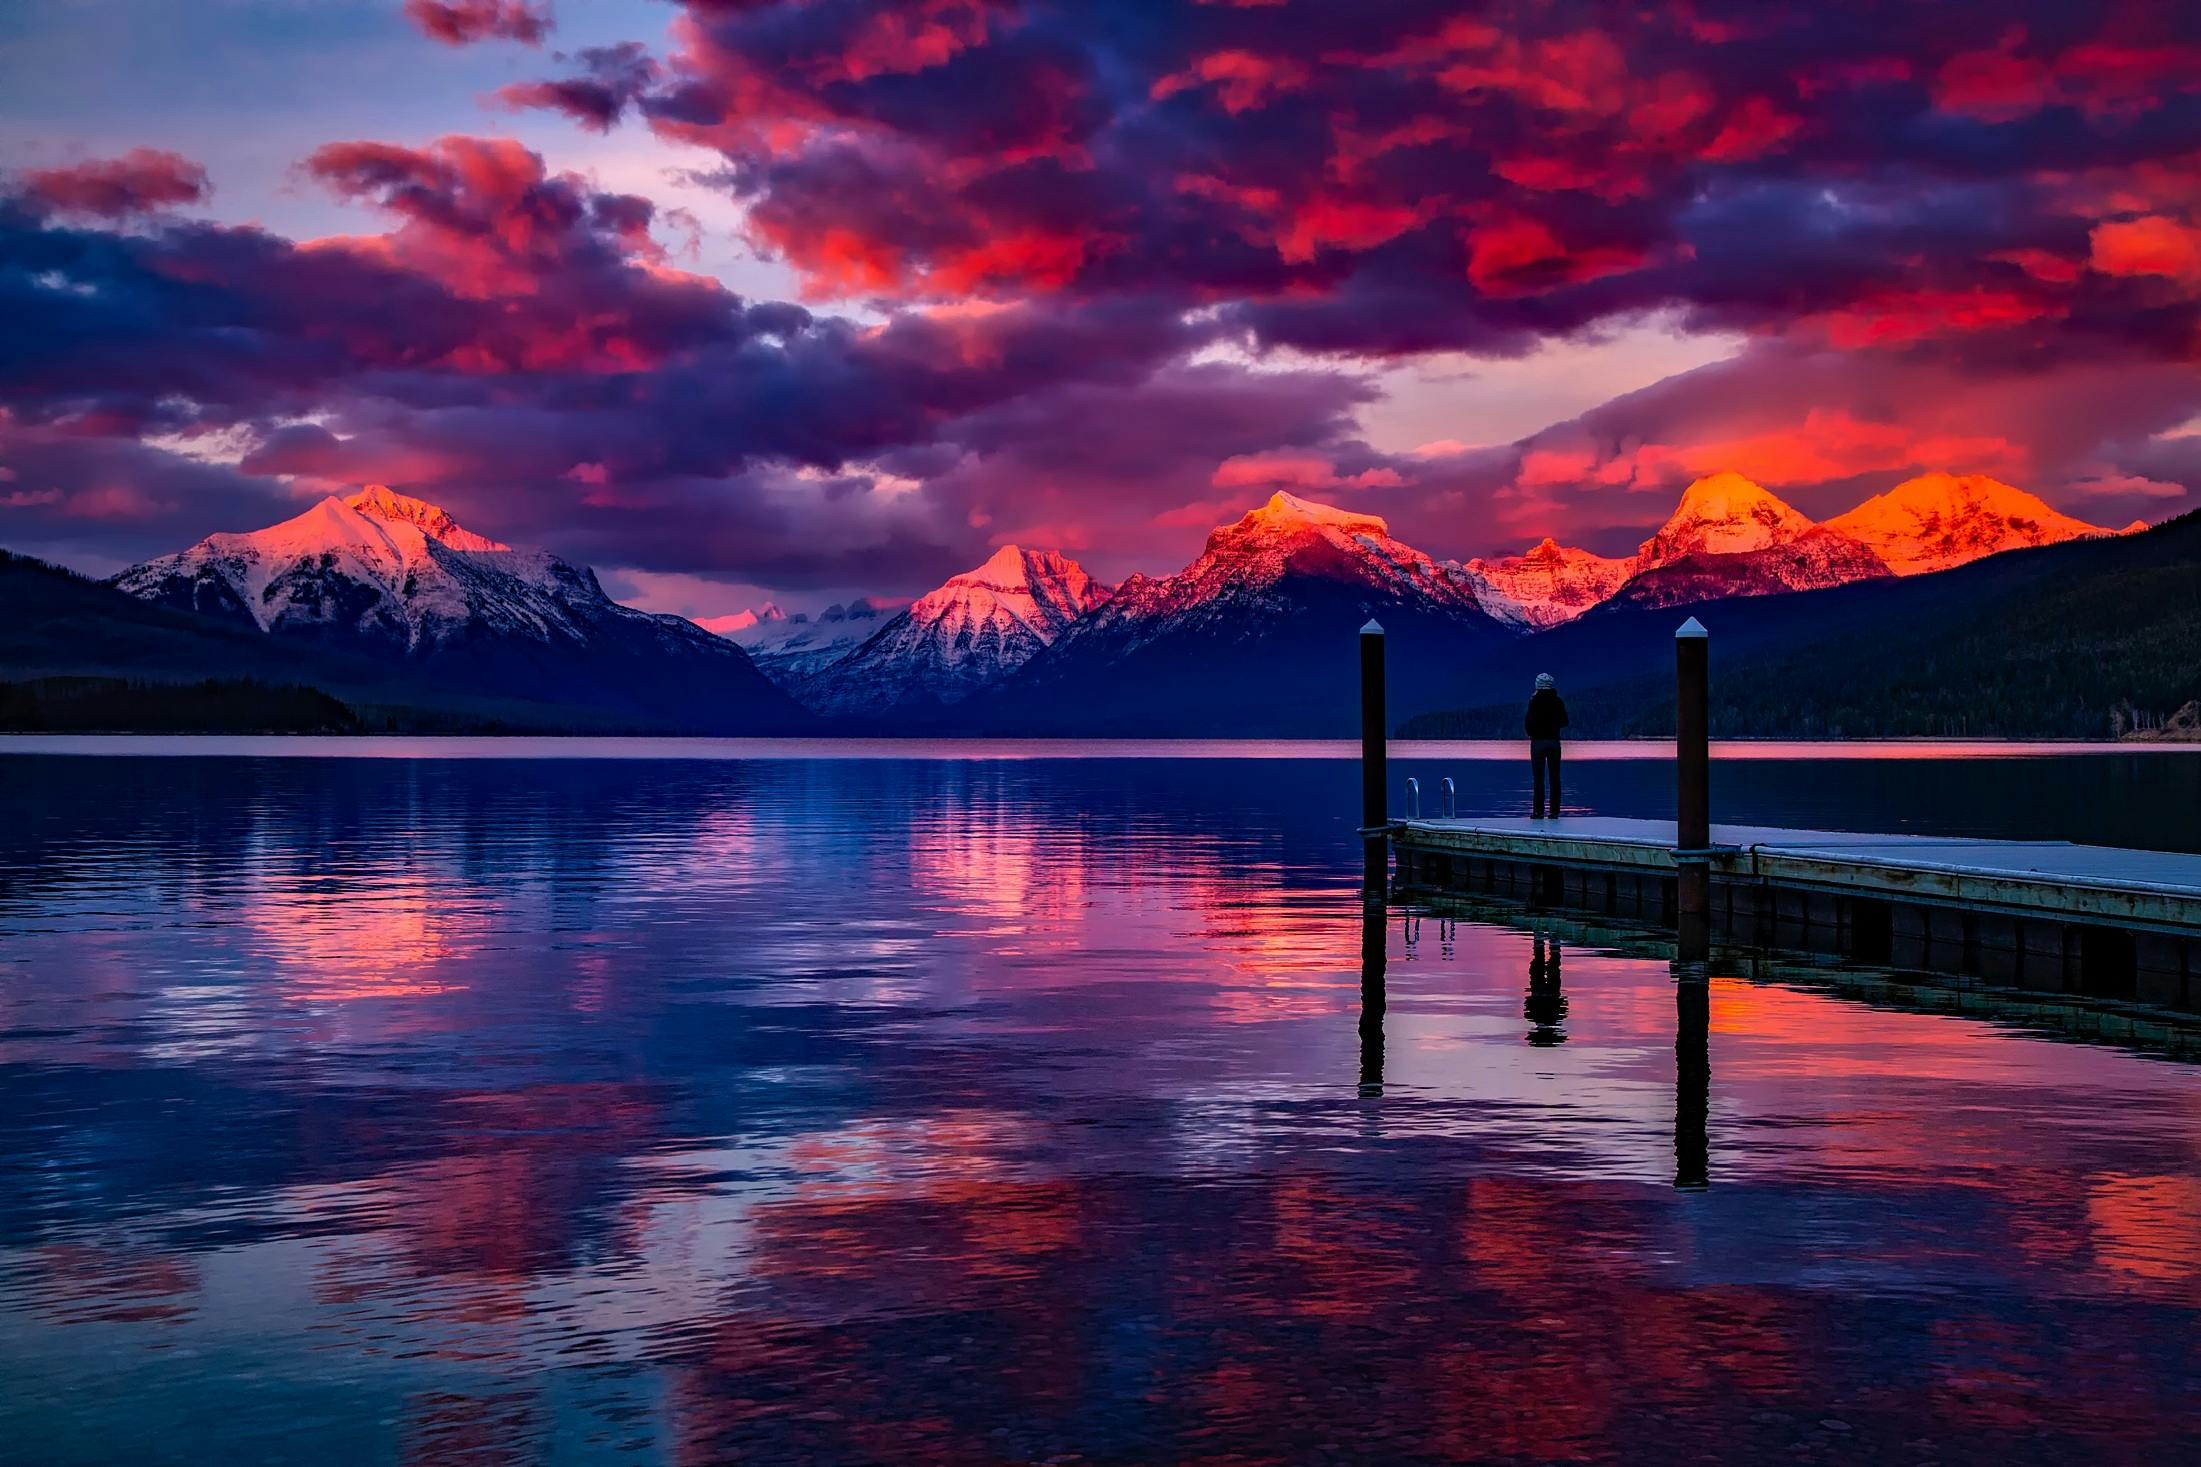 A man stands on a dock in front of a lake and mountains at sunset. - Desktop